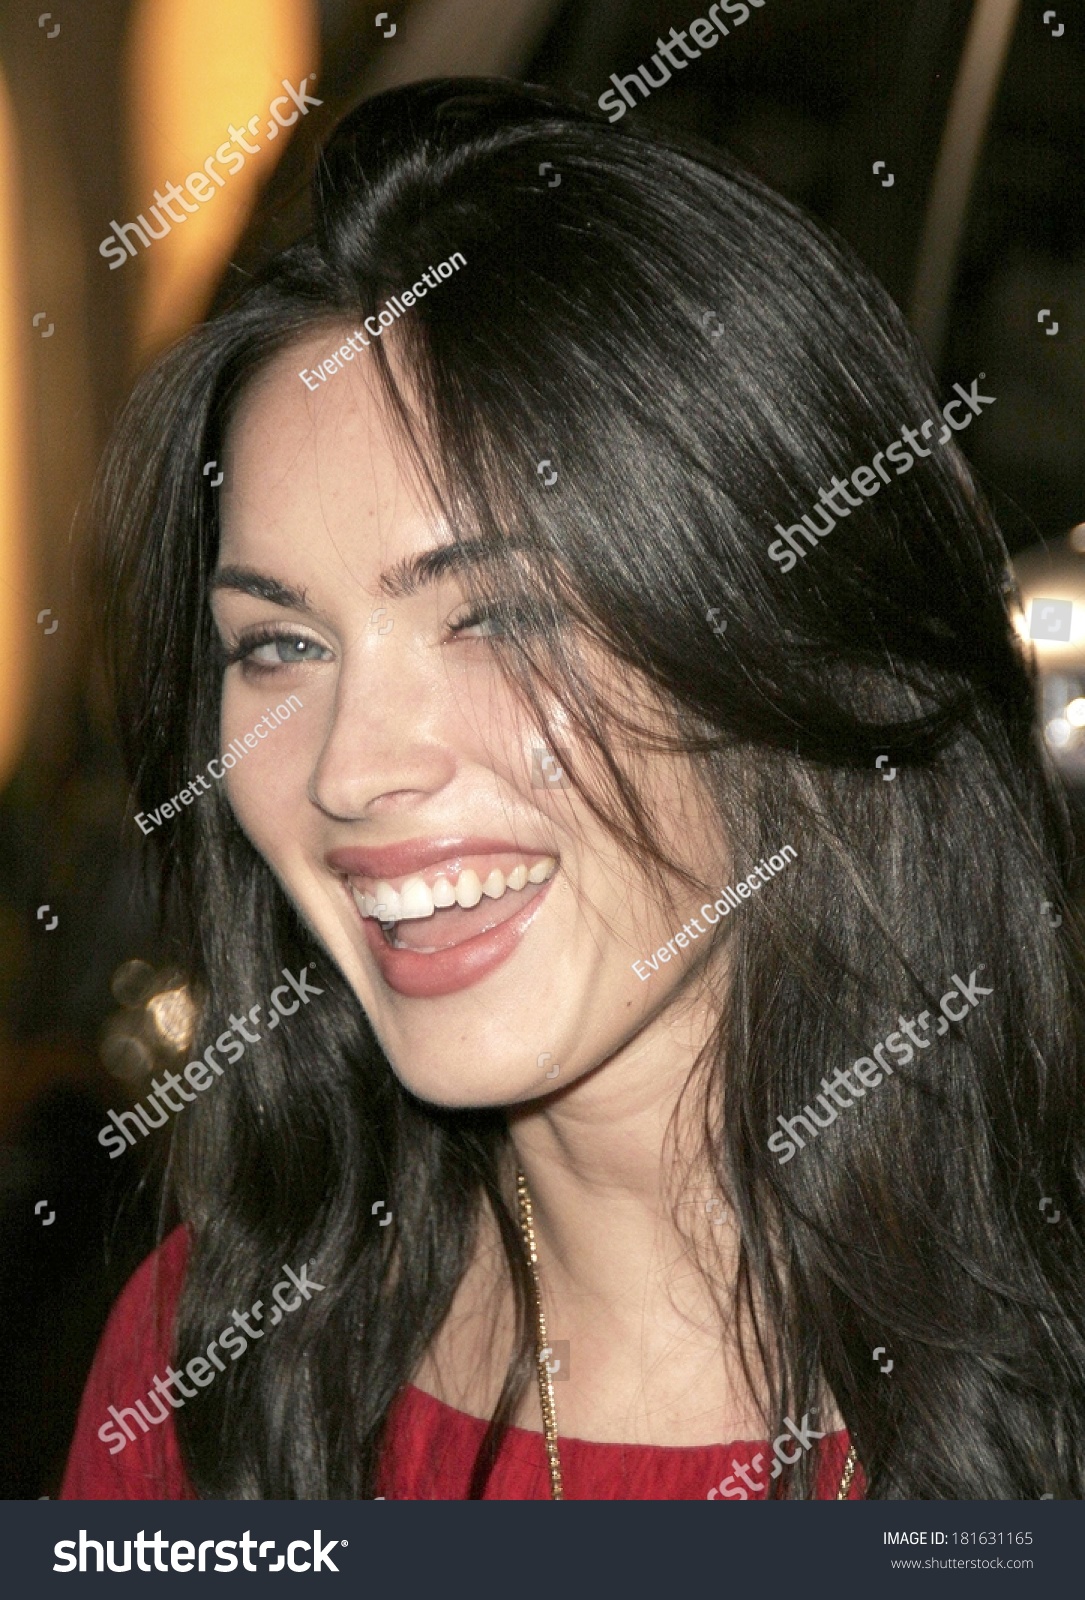 GLOSSY PHOTO PICTURE 8x10 Megan Fox Smiling 